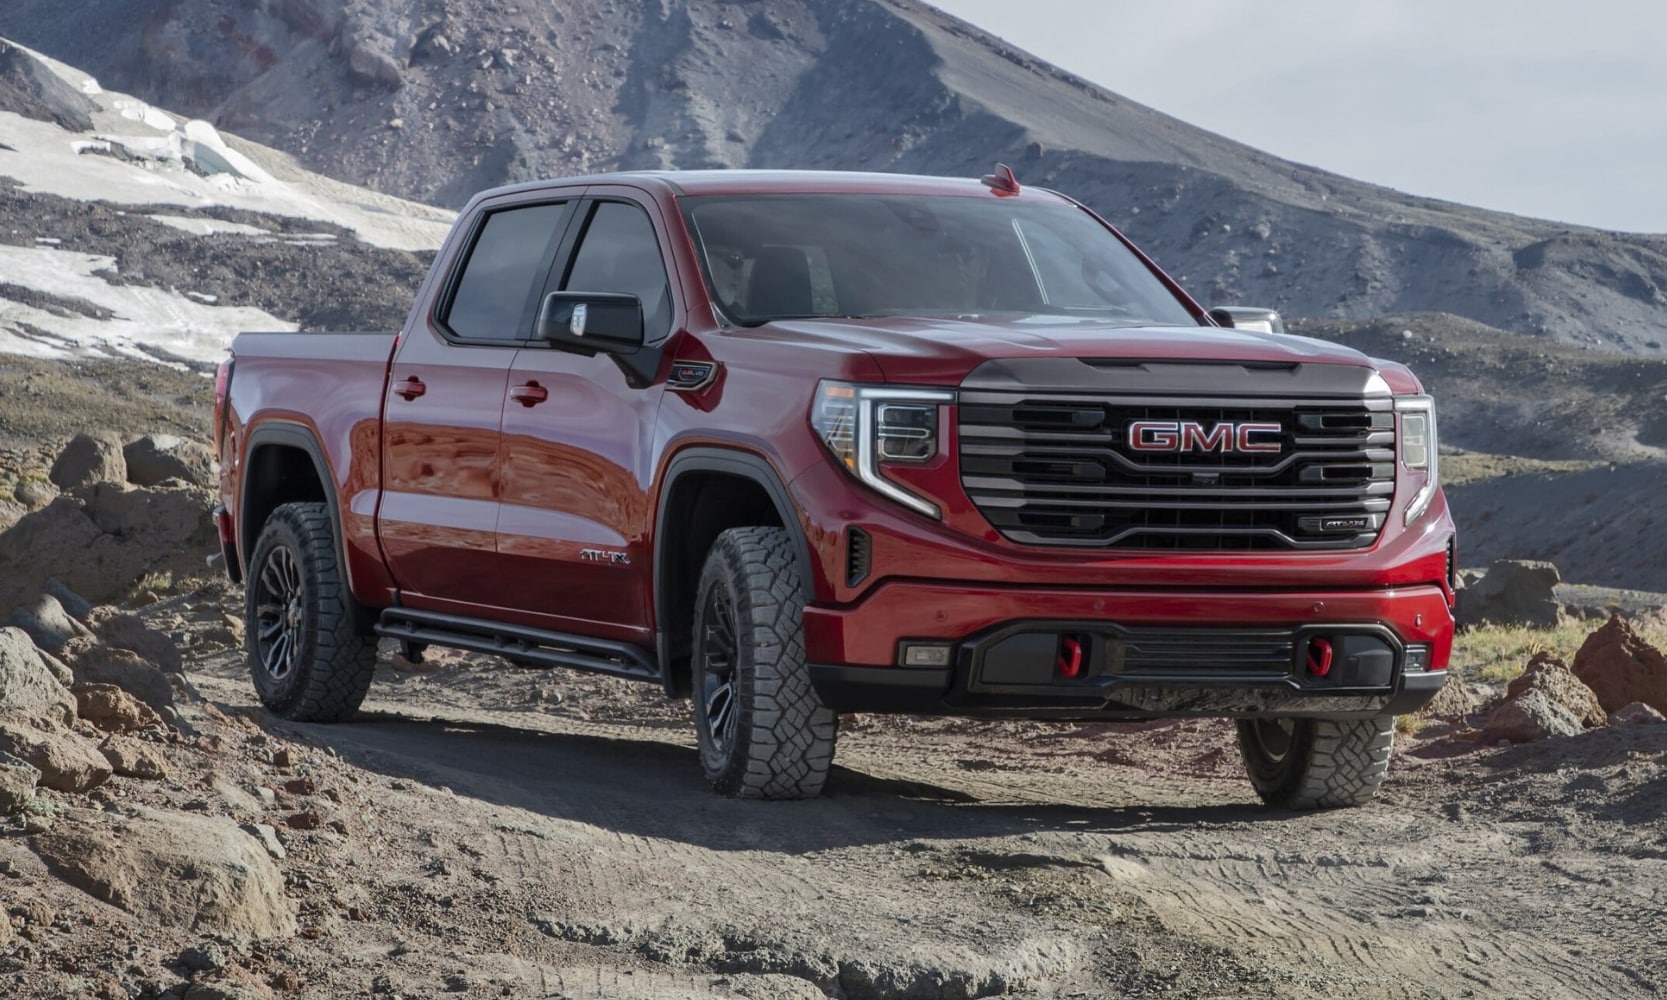 New 2022 GMC Sierra 1500 AT4 model in Cayenne Red on an off-road trail through a mountain pass